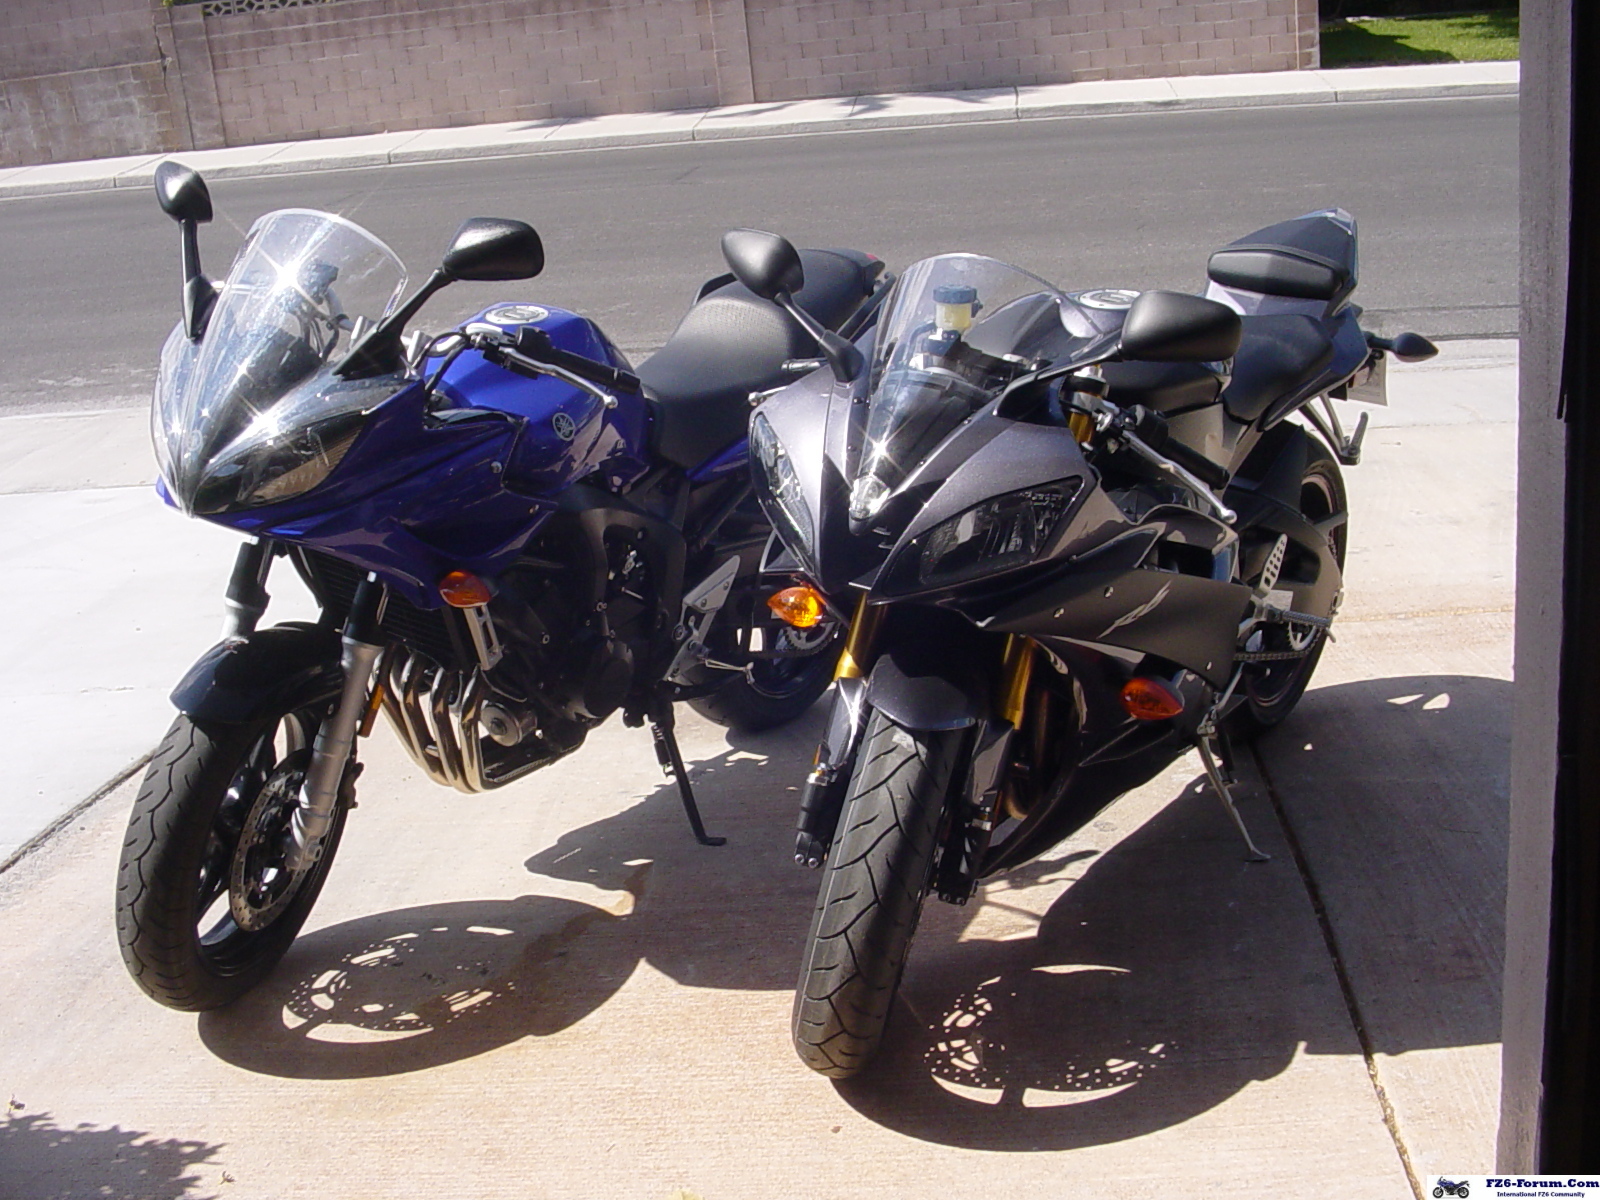 '07 R6 and '06 FZ6